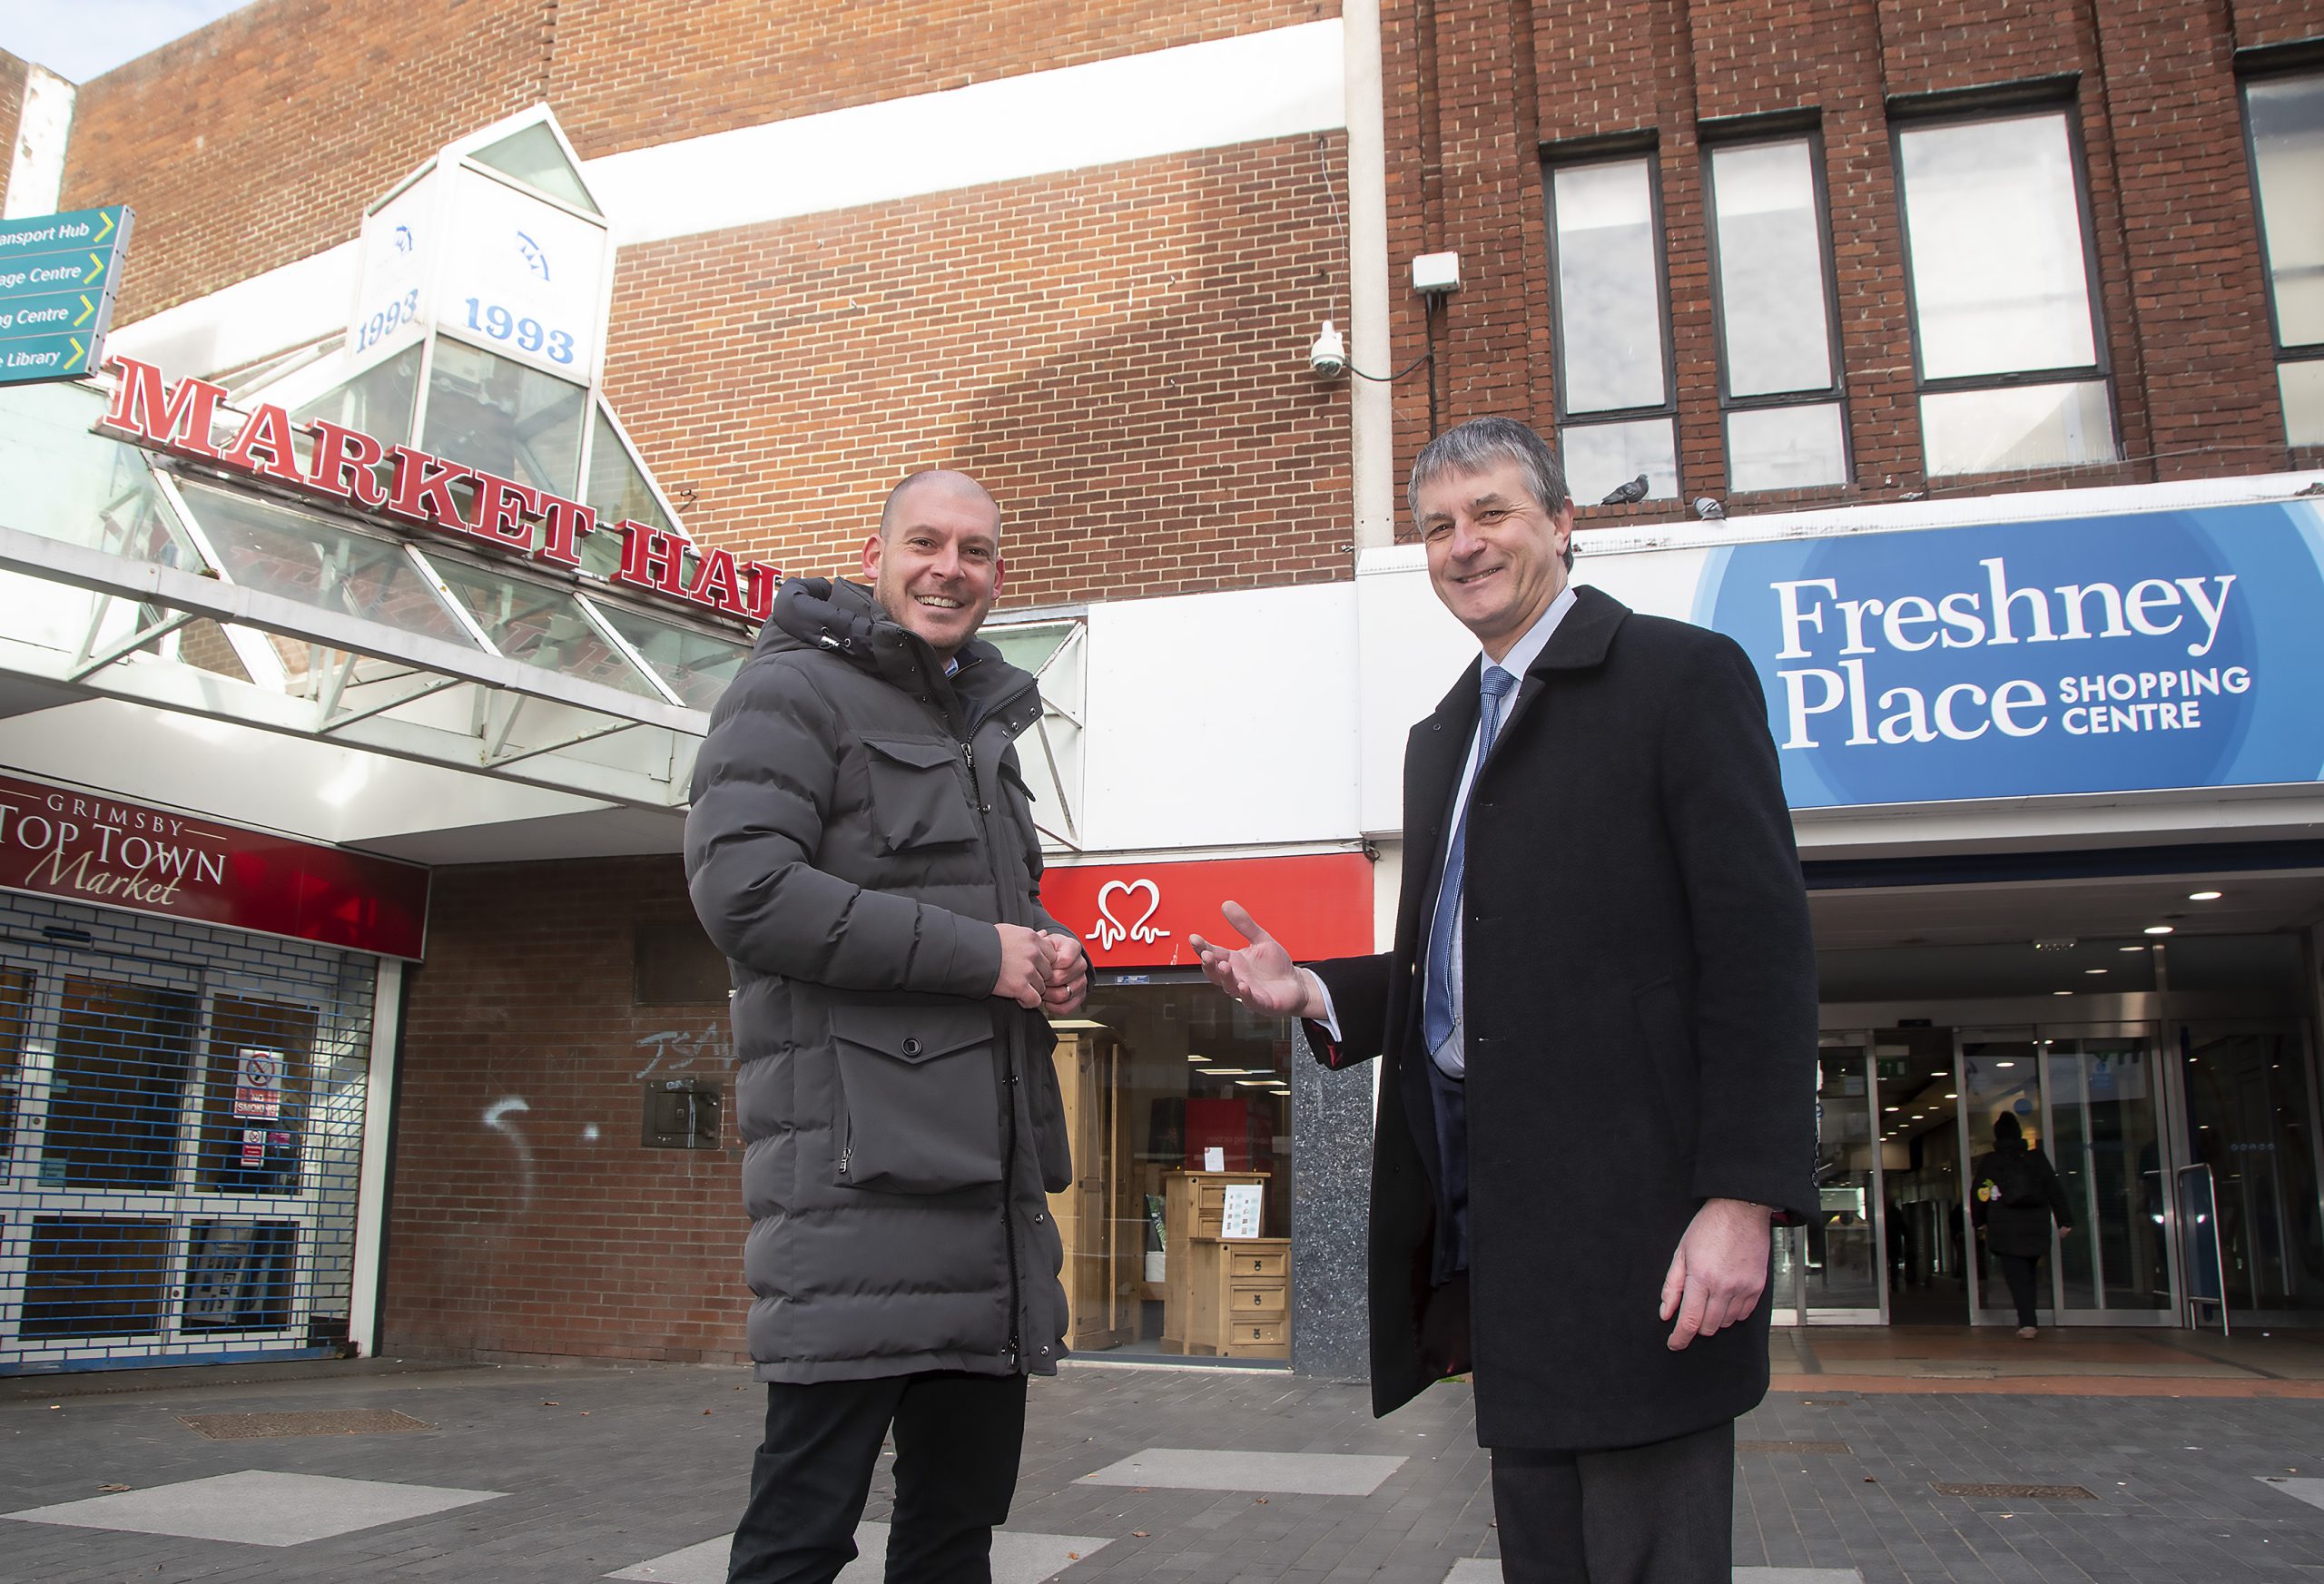 Ben Hall Morgan Sindall and Cllr Philip Jackson NELC Leader outside Freshney Place